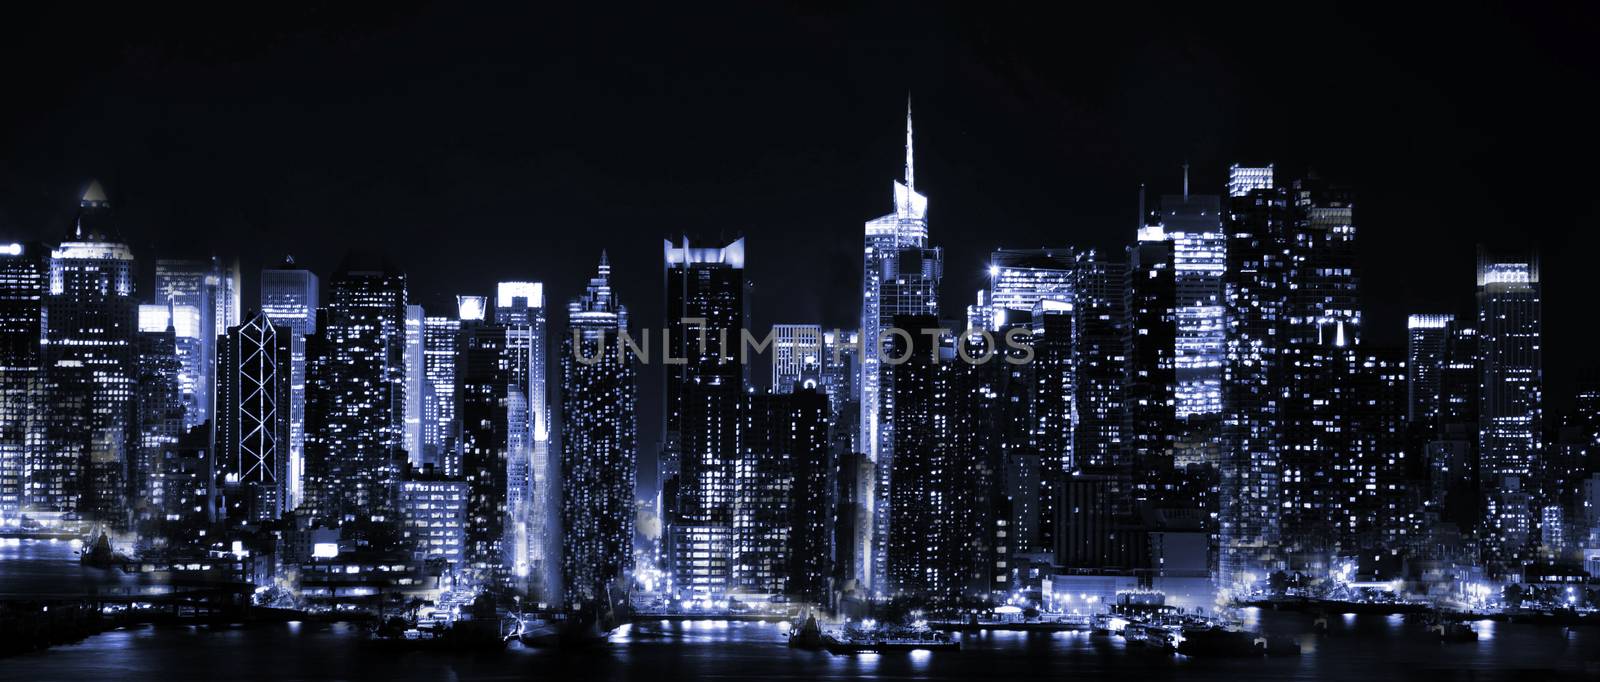 View of the night city from afar.Texture or background by Mastak80